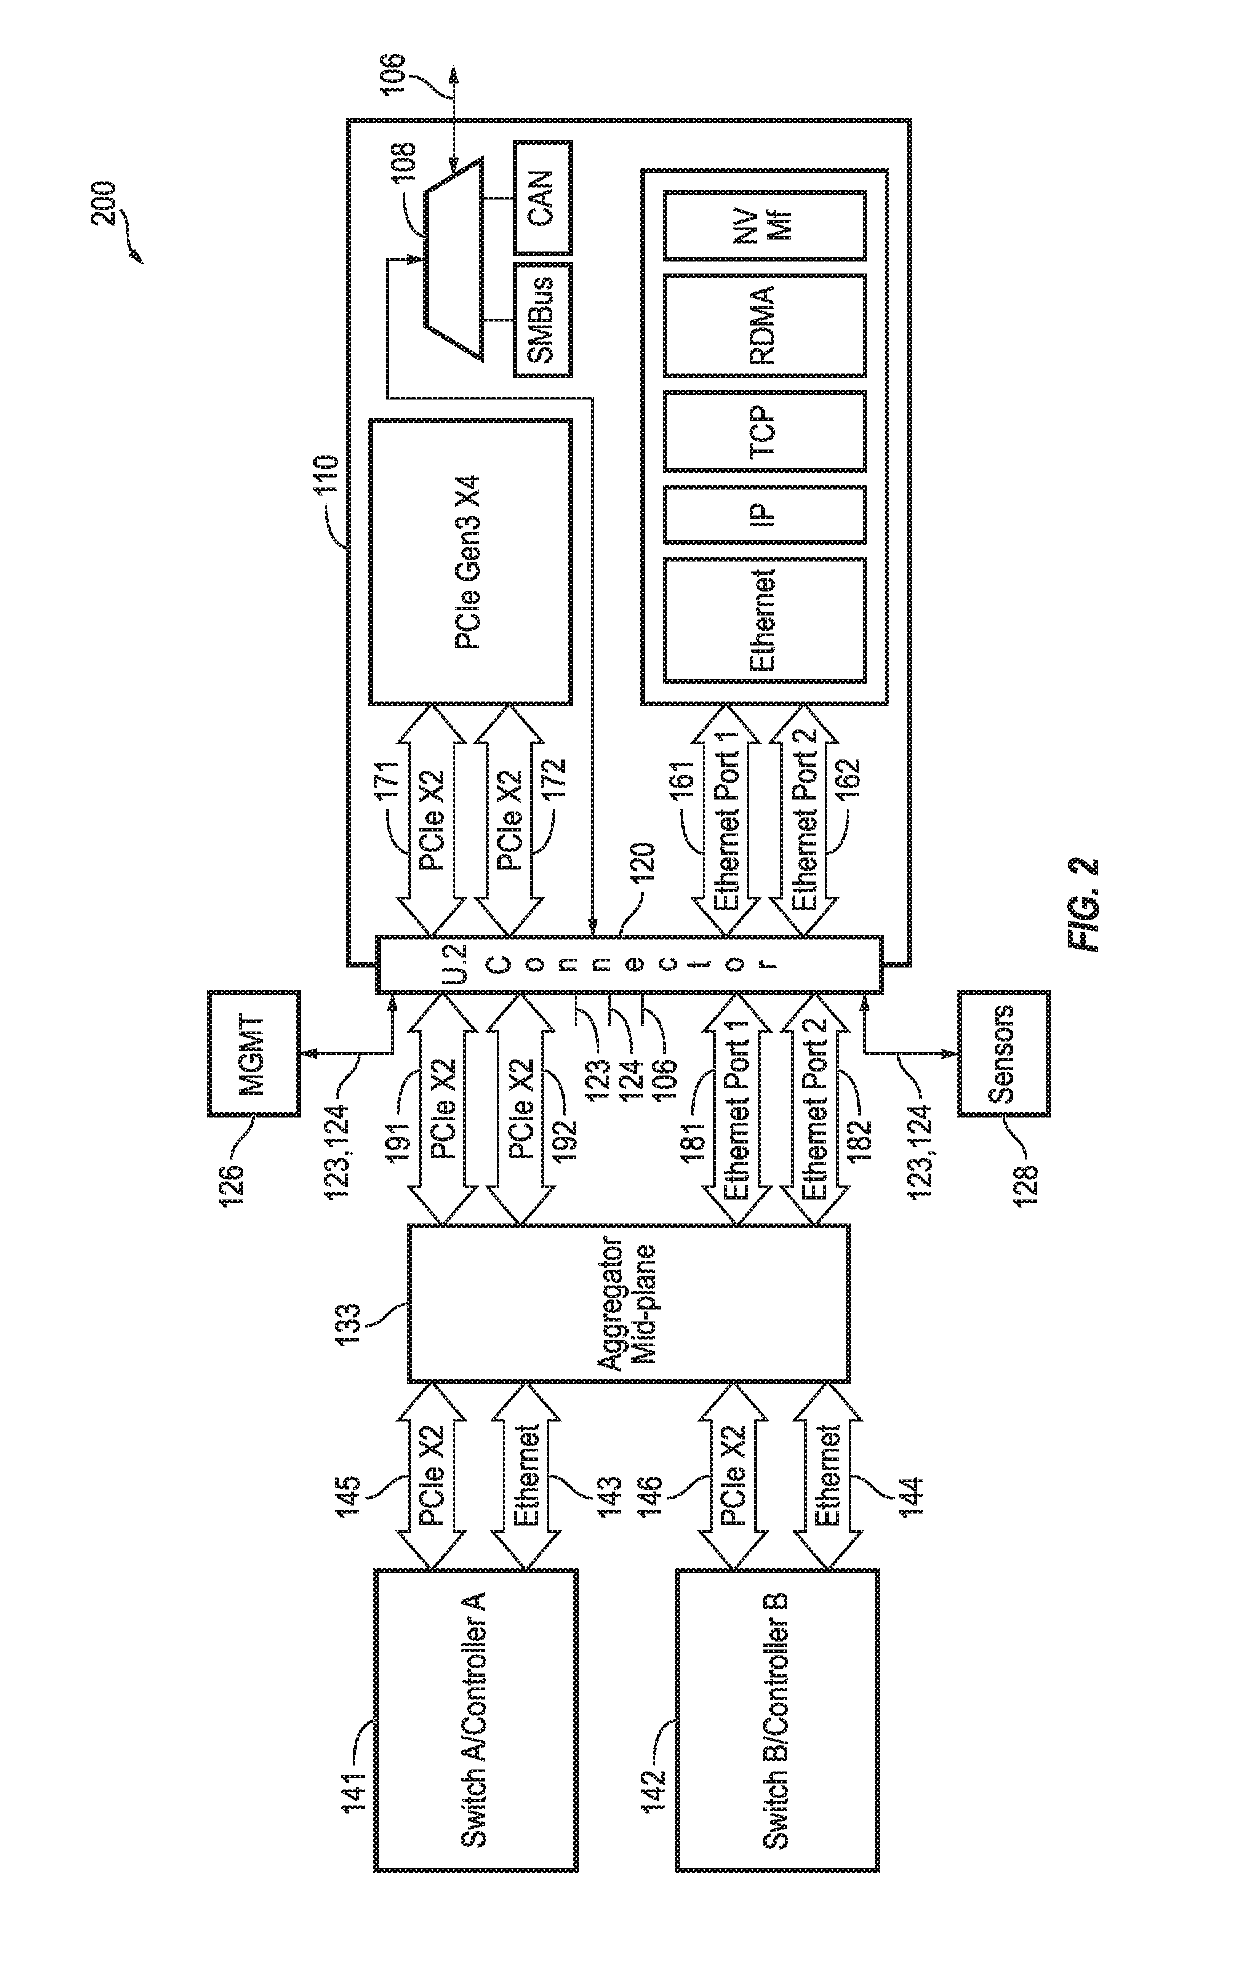 Multi-mode NVMe over fabrics device for supporting CAN (controller area network) bus or SMBus interface